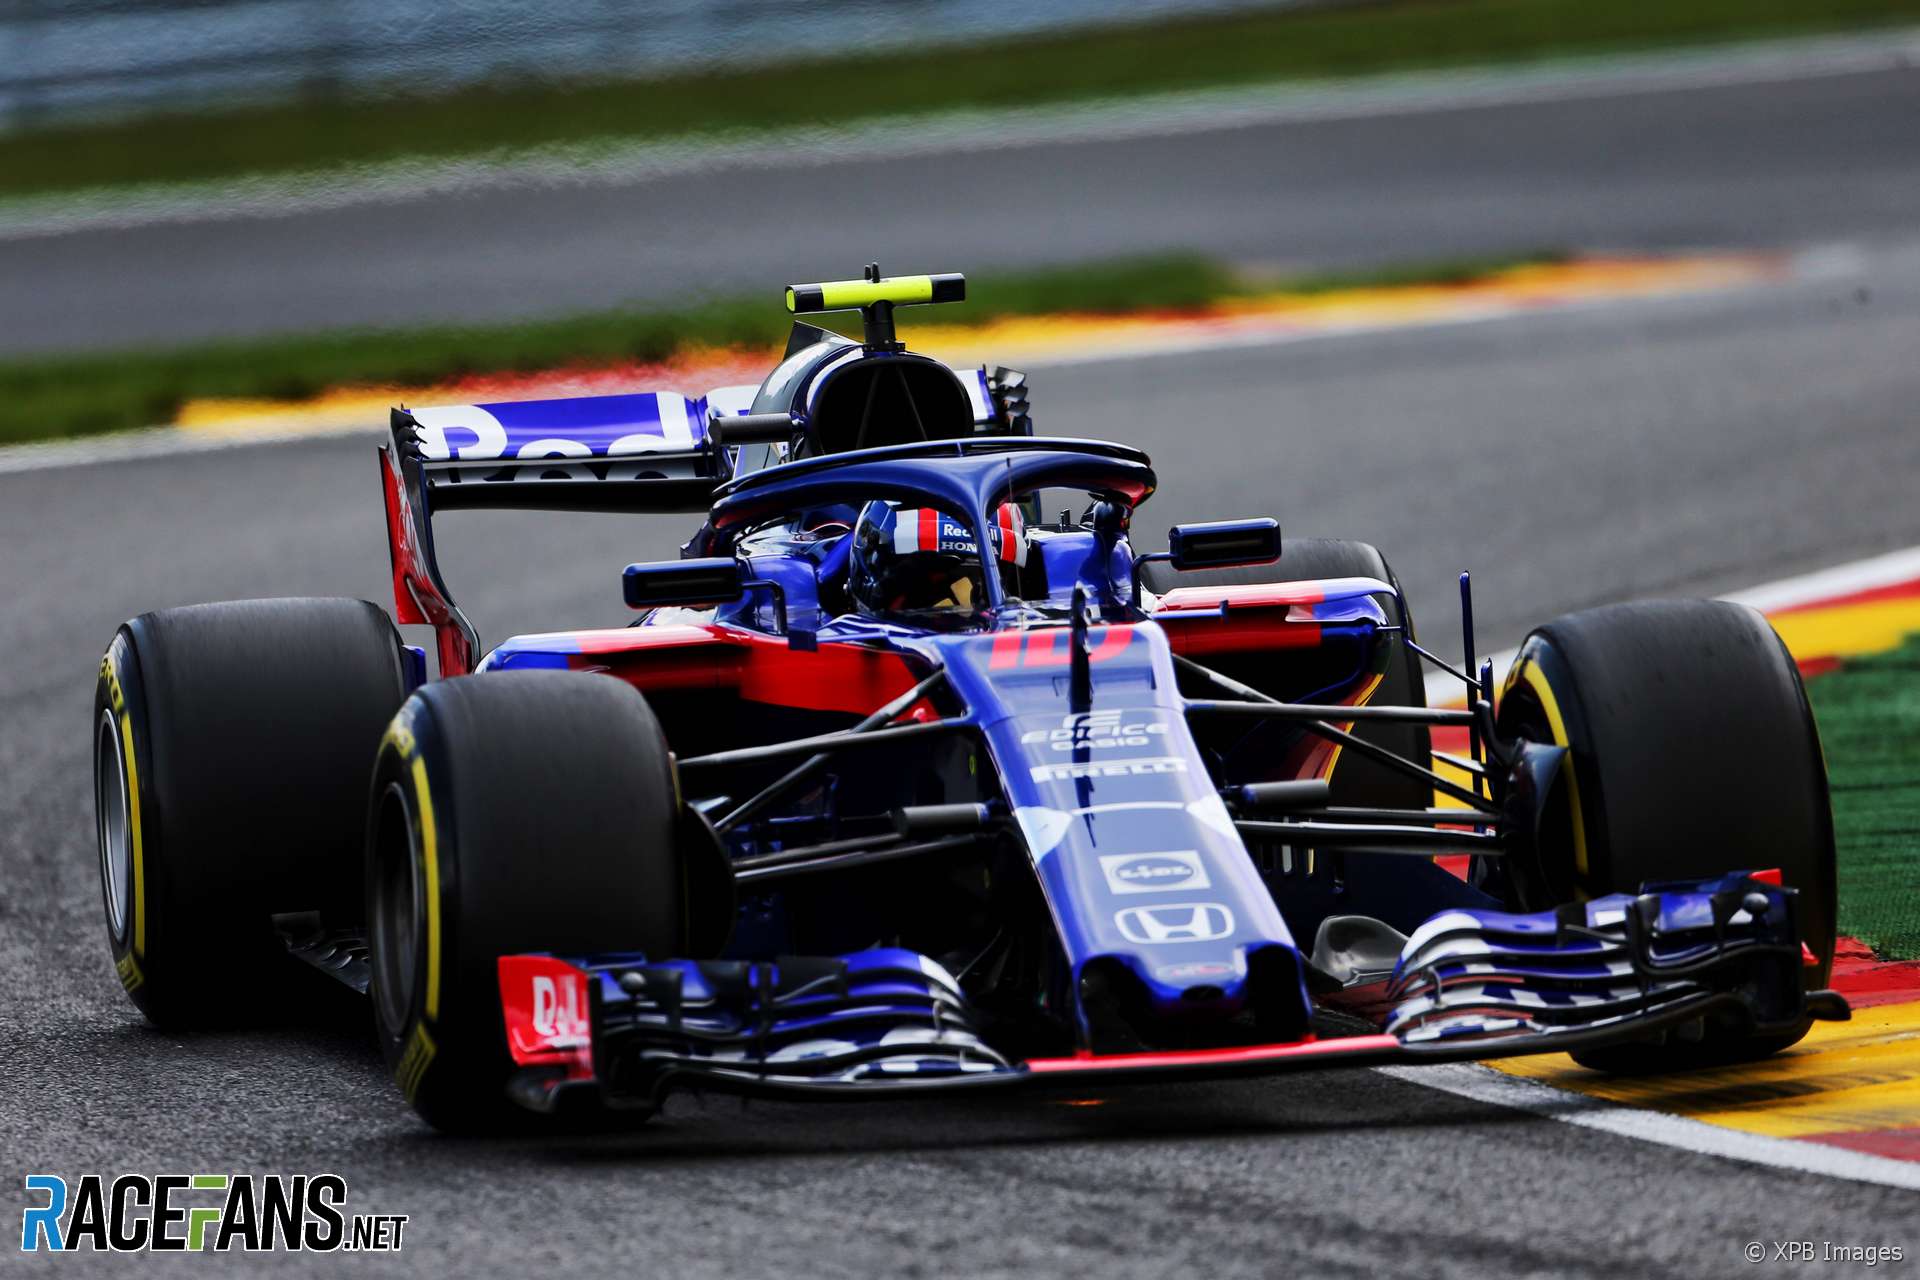 Pierre Gasly, Toro Rosso, Spa-Francorchamps, 2018 · RaceFans